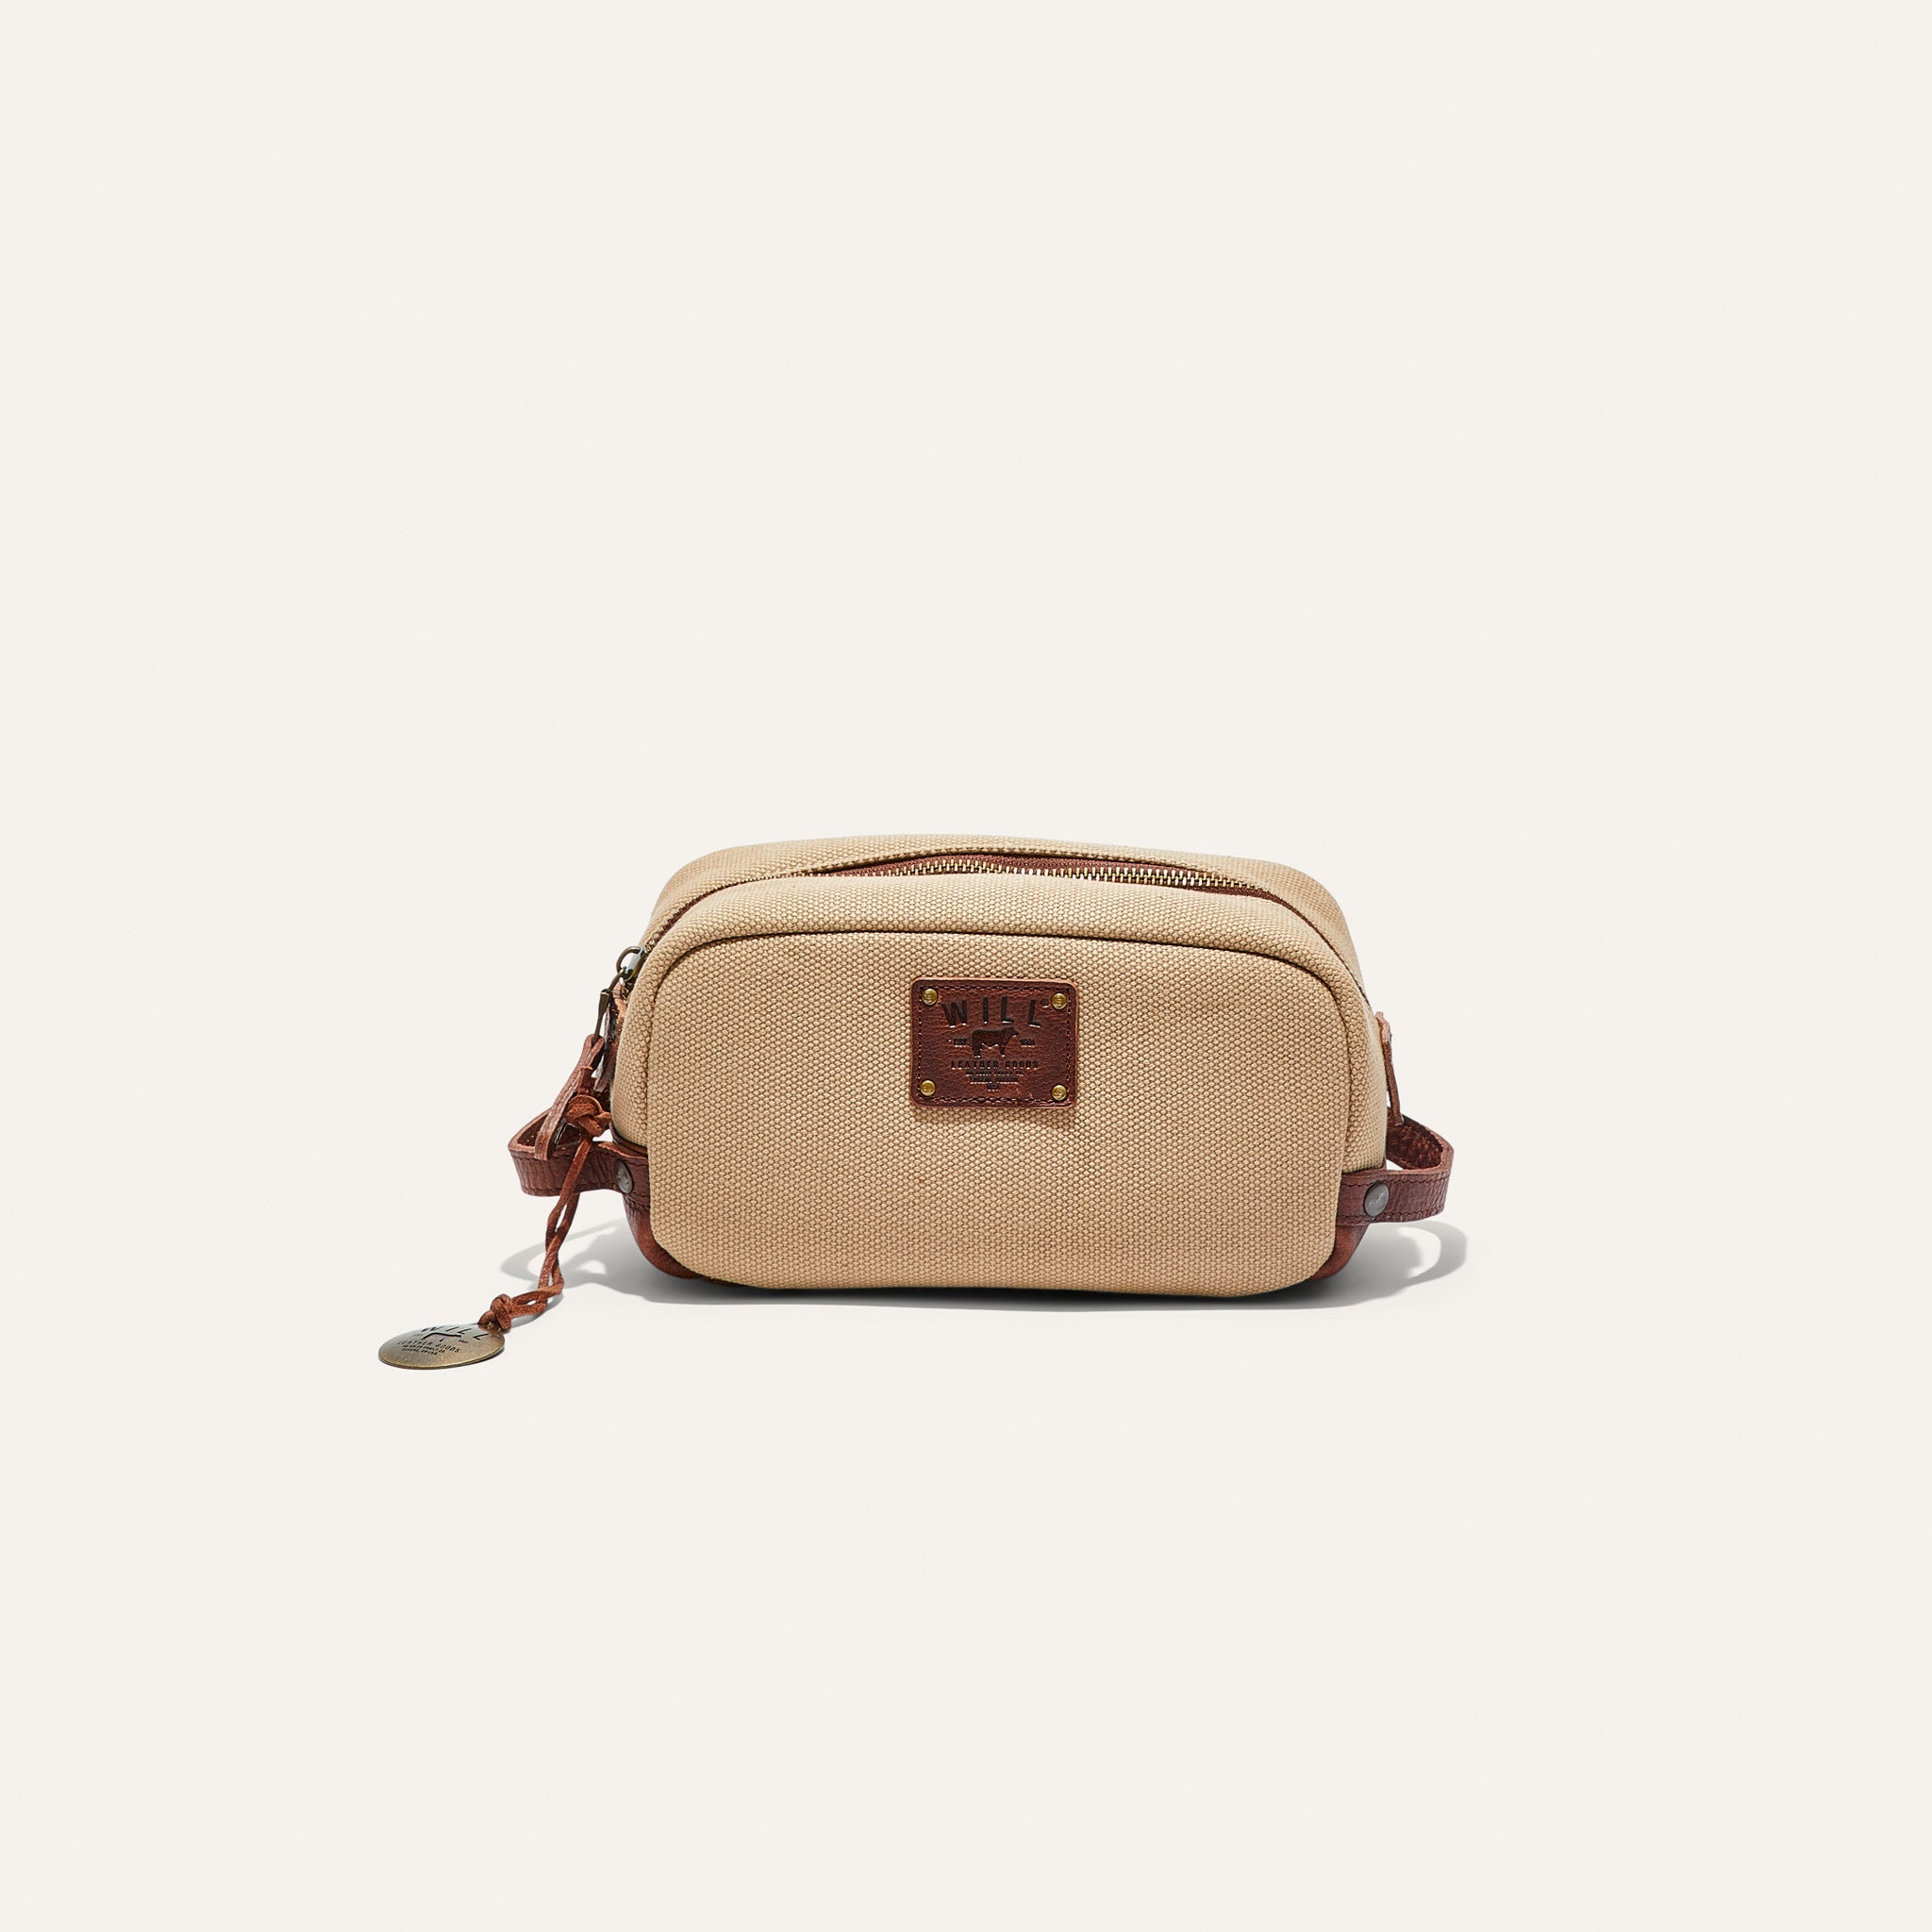 Coach Outlet Small Travel Kit in Signature Canvas - Multi